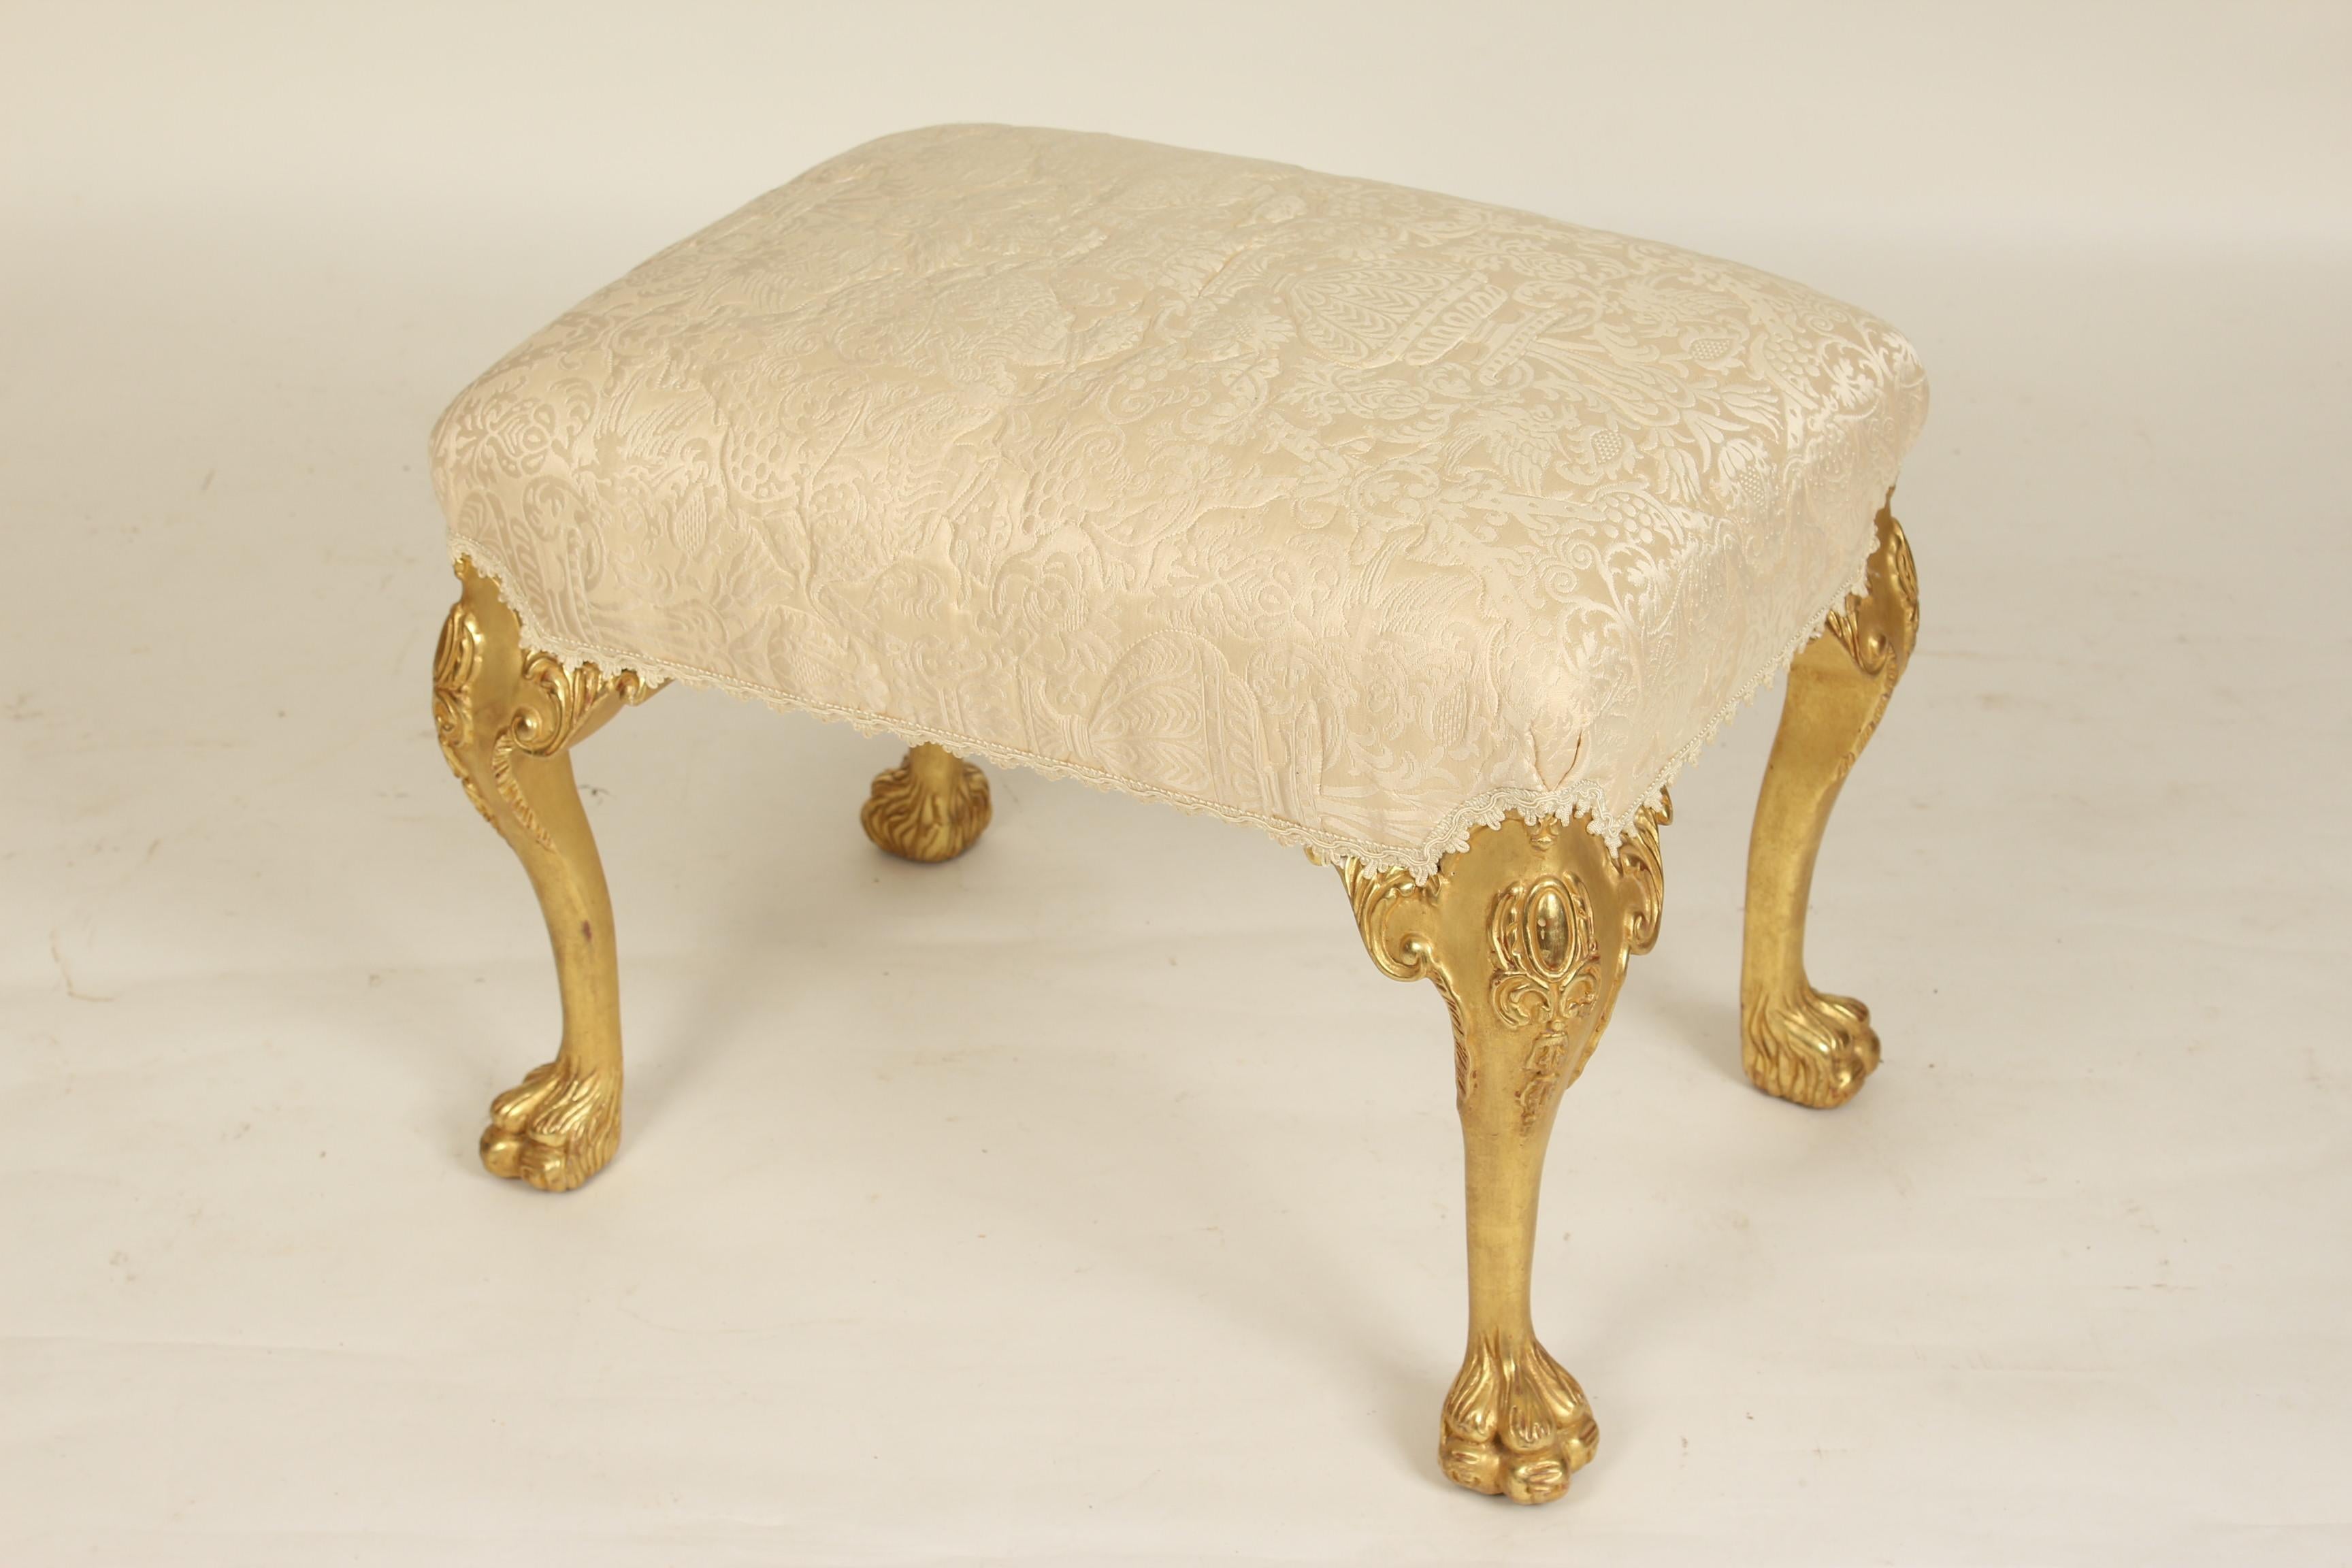 George II style giltwood (gold leaf) bench, late 20th century.